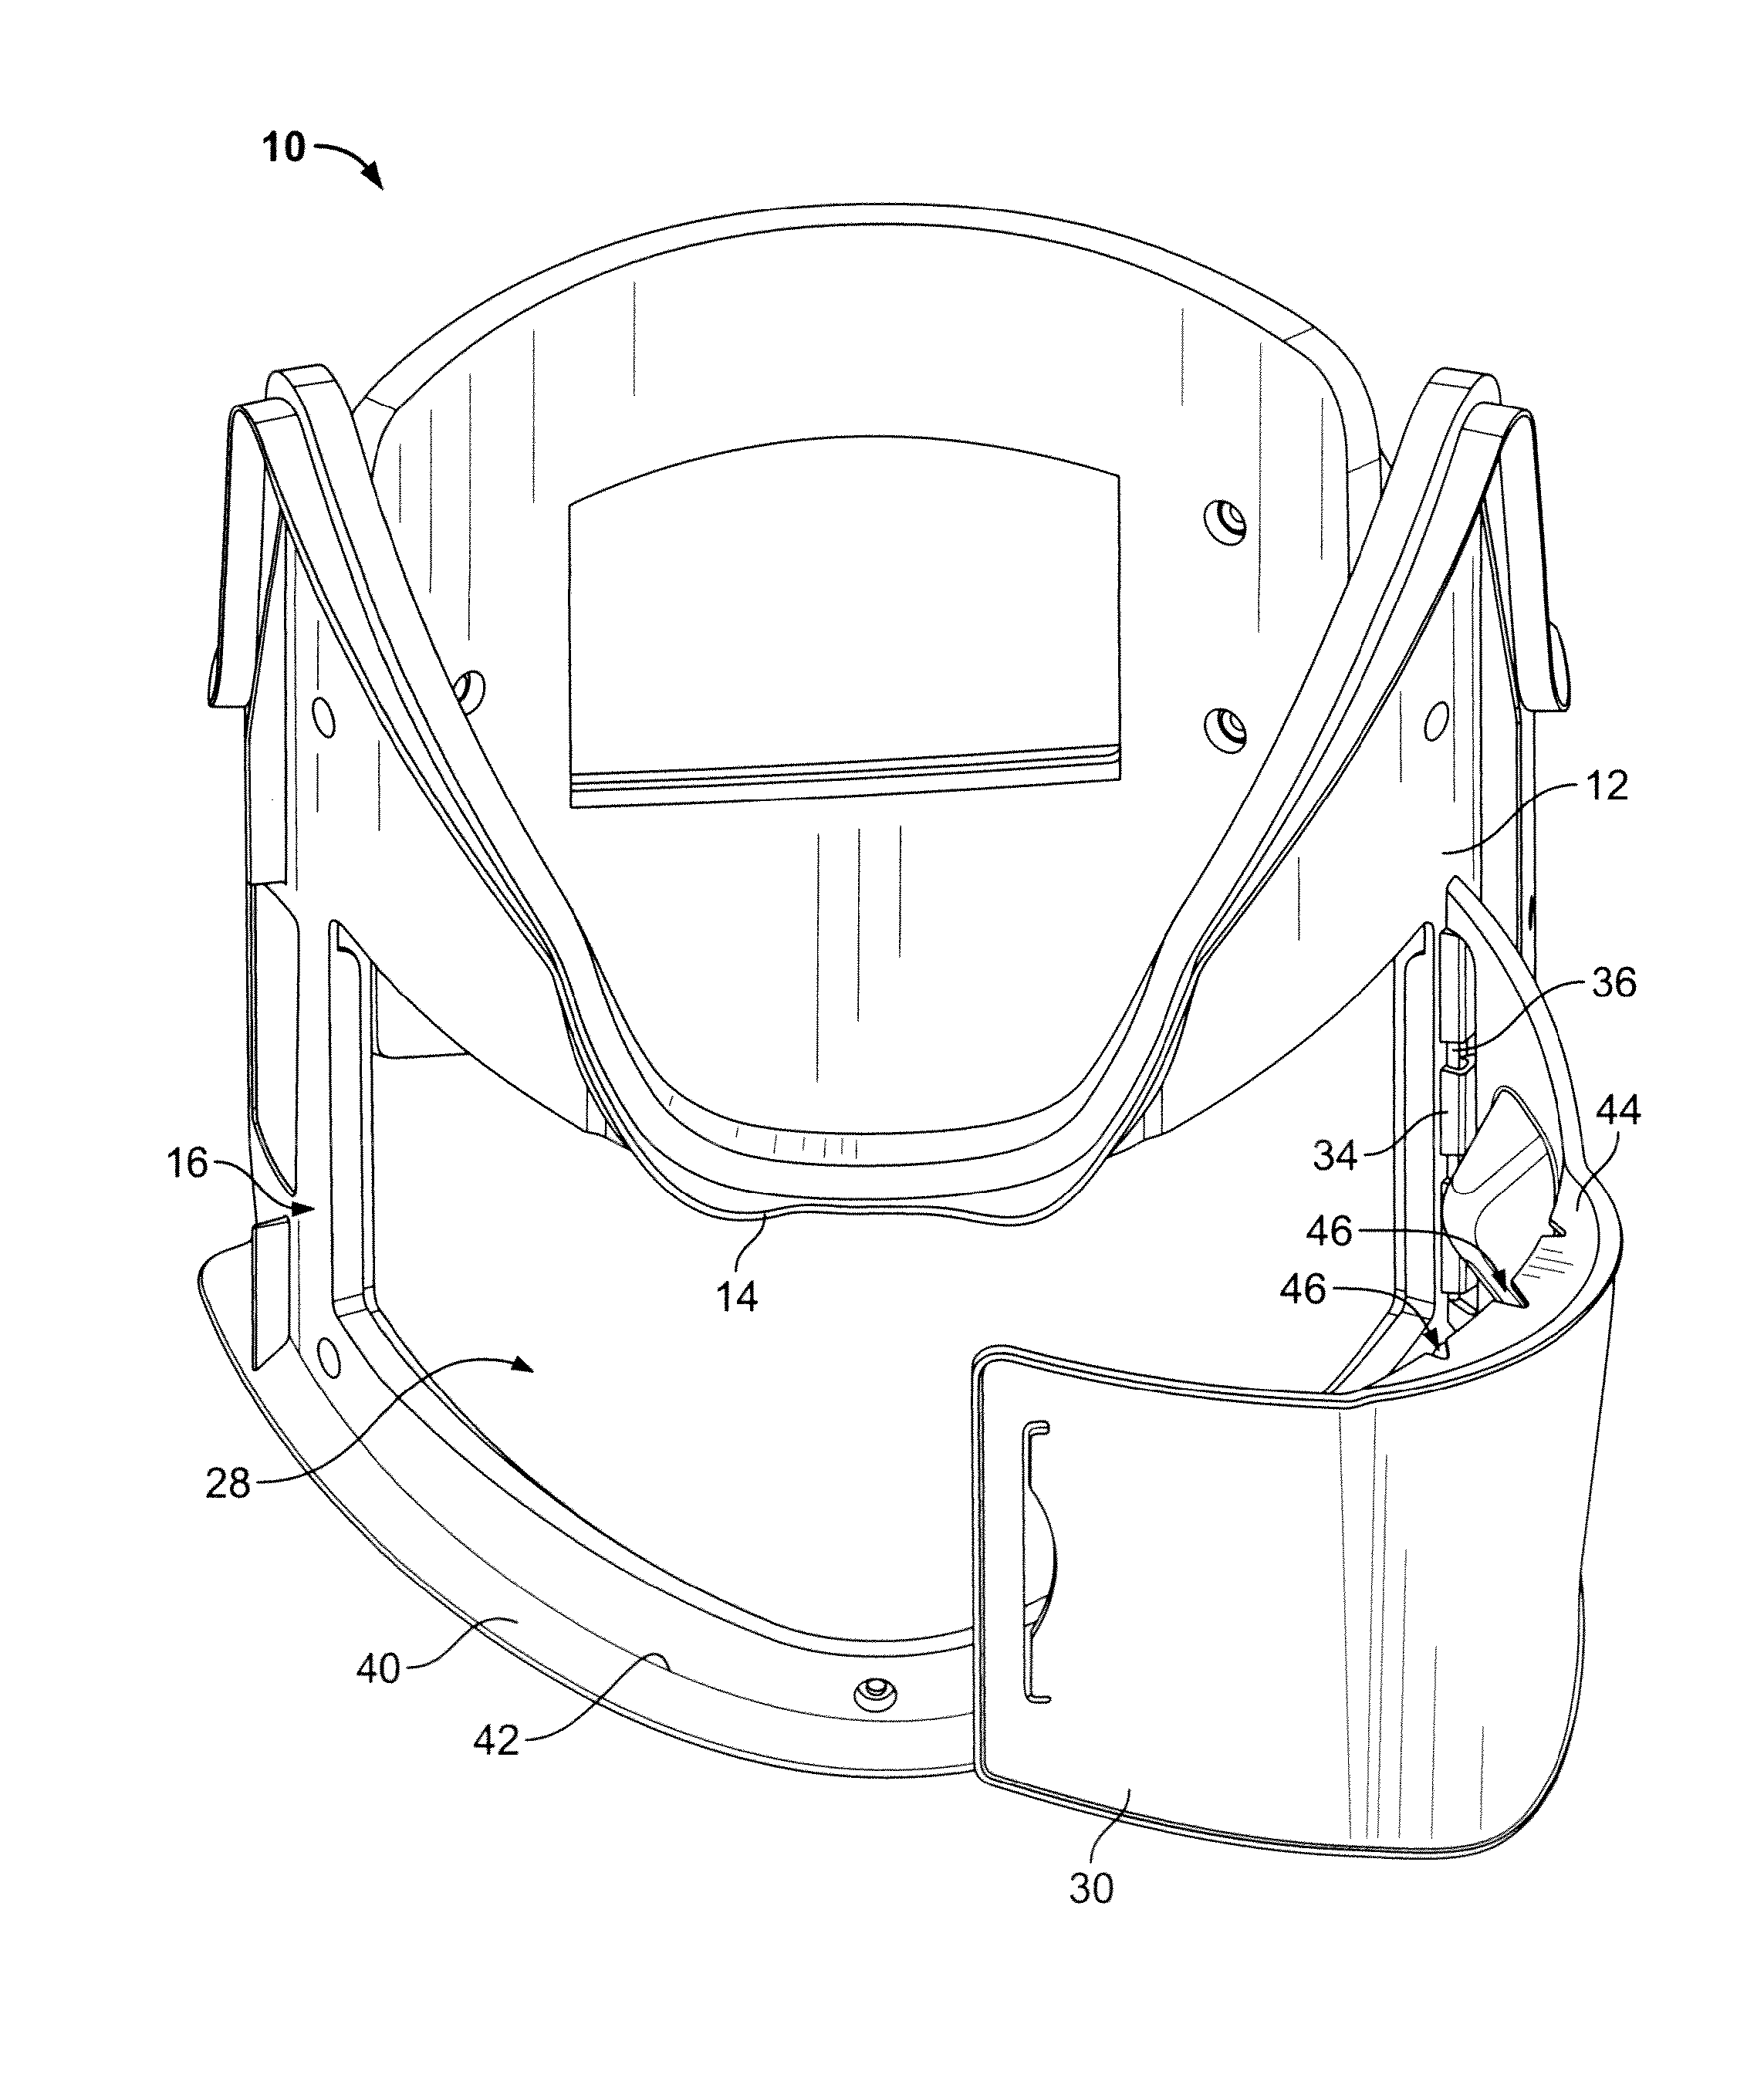 Cervical immobilization collar with arterial cooling elements